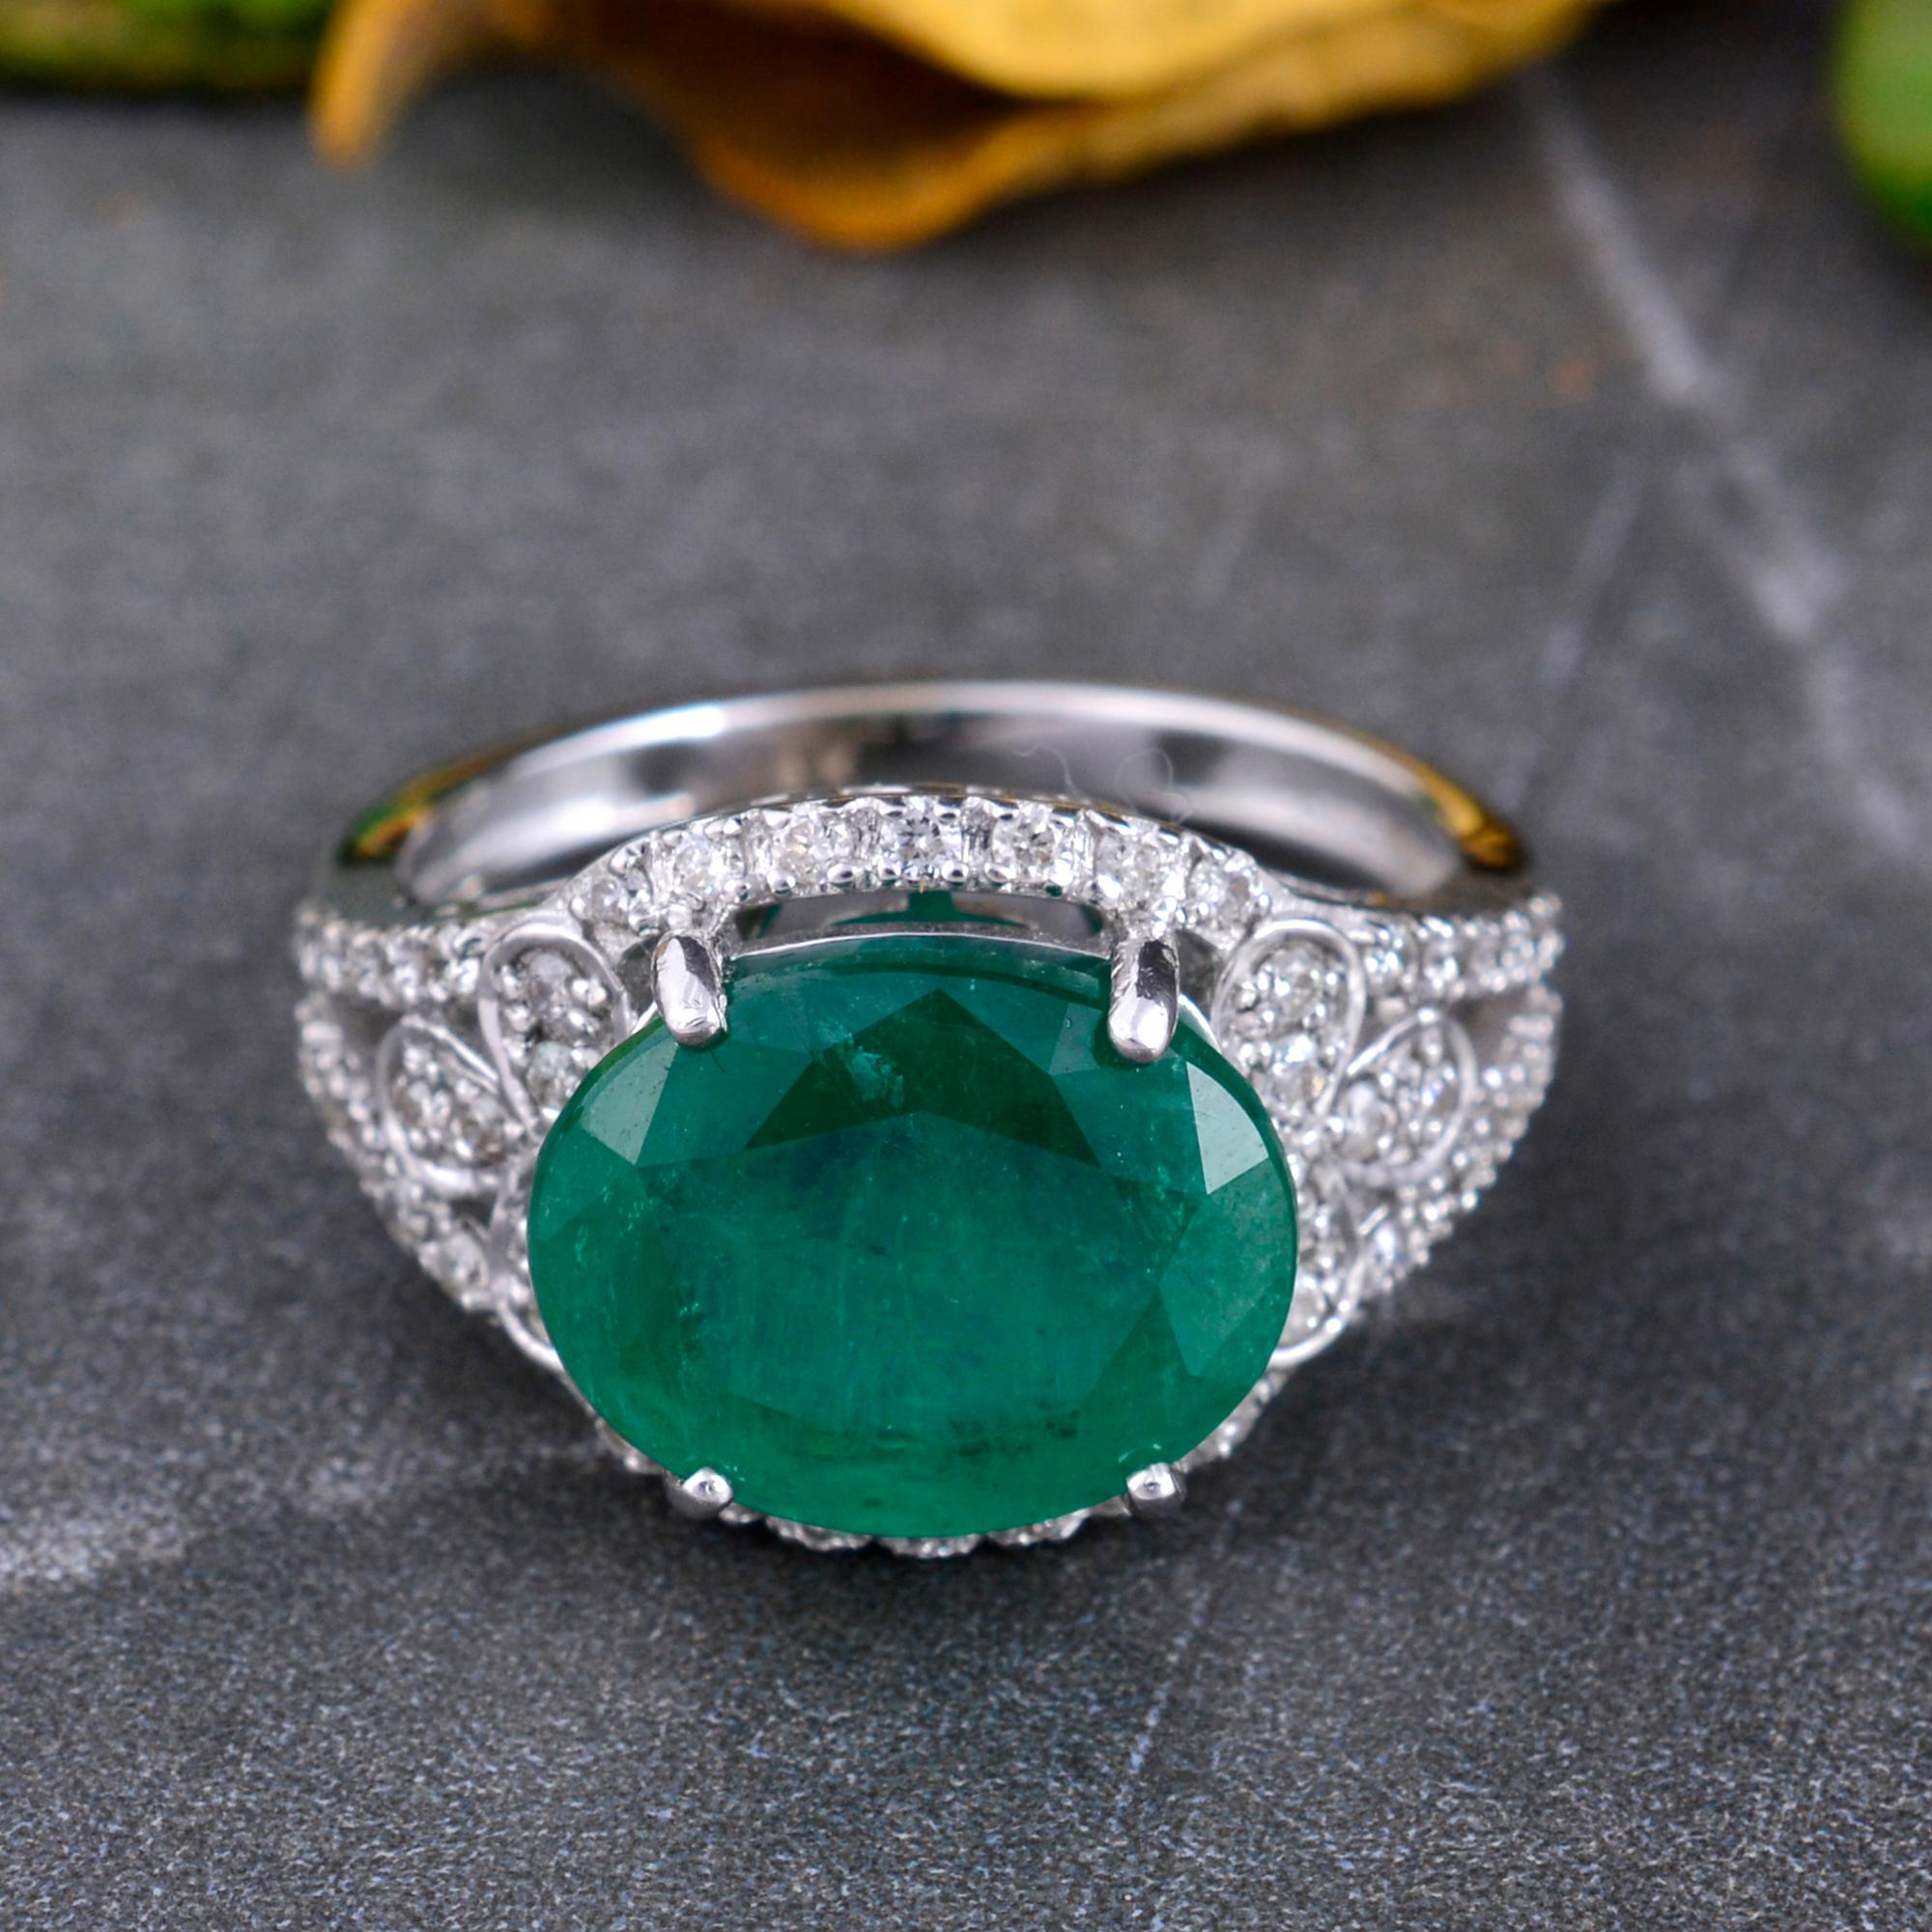 For Sale:  Oval Emerald Gemstone Dome Ring SI Clarity HI Color Diamond 18 Karat White Gold 4